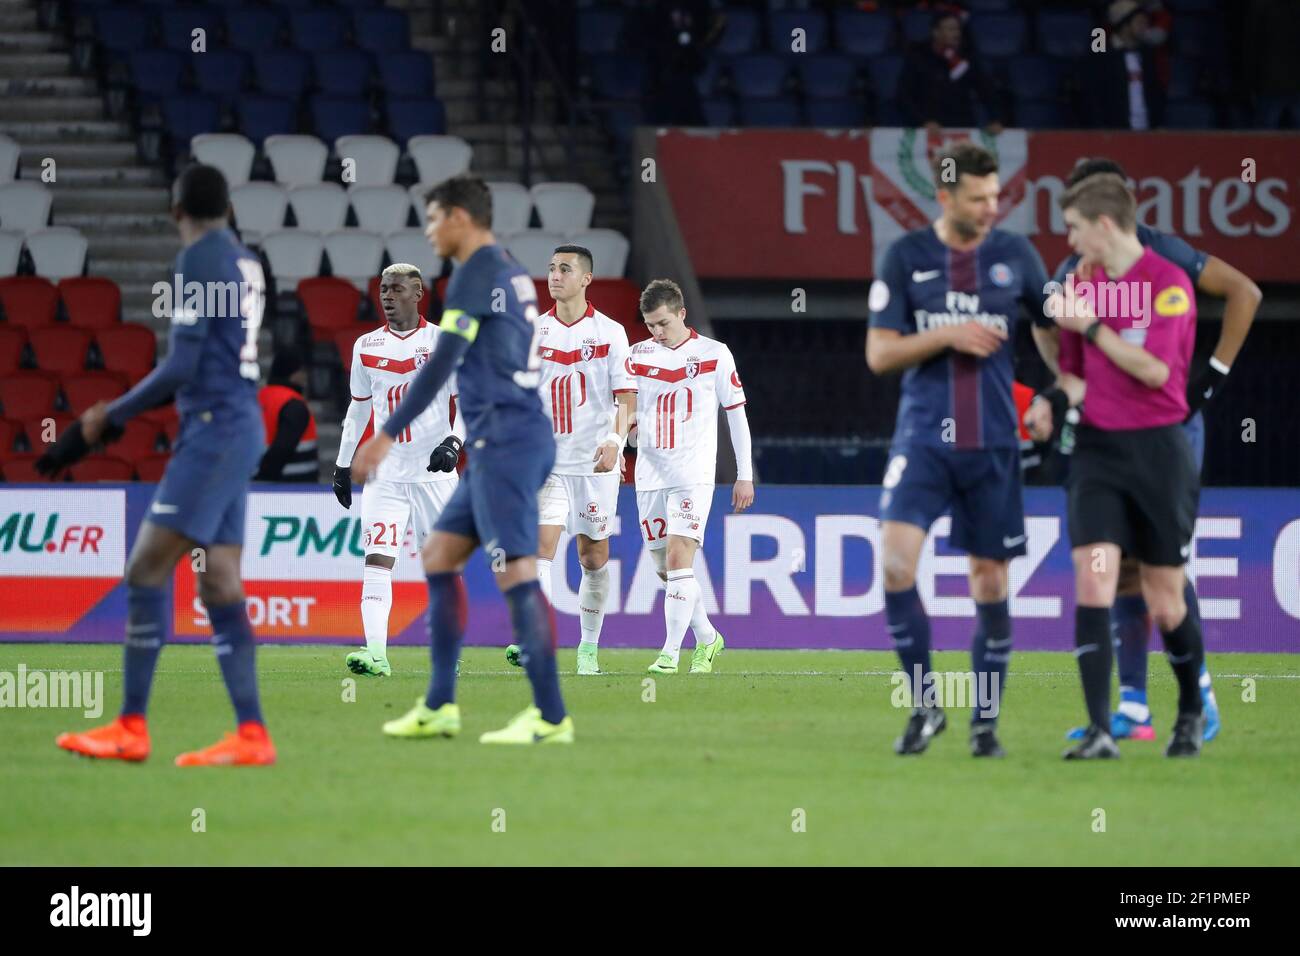 Nicolas DE PREVILLE (Lille OSC) scored a goal and celebrated it, Naim SLITI (Lille OSC), Yves BISSOUMA (Lille OSC) during the French championship Ligue 1 football soccer match between Paris Saint-Germain (PSG) and Lille (LOSC) on February 7, 2017 at Parc des Princes Stadium in Paris, France - Photo Stephane Allaman / DPPI Stock Photo